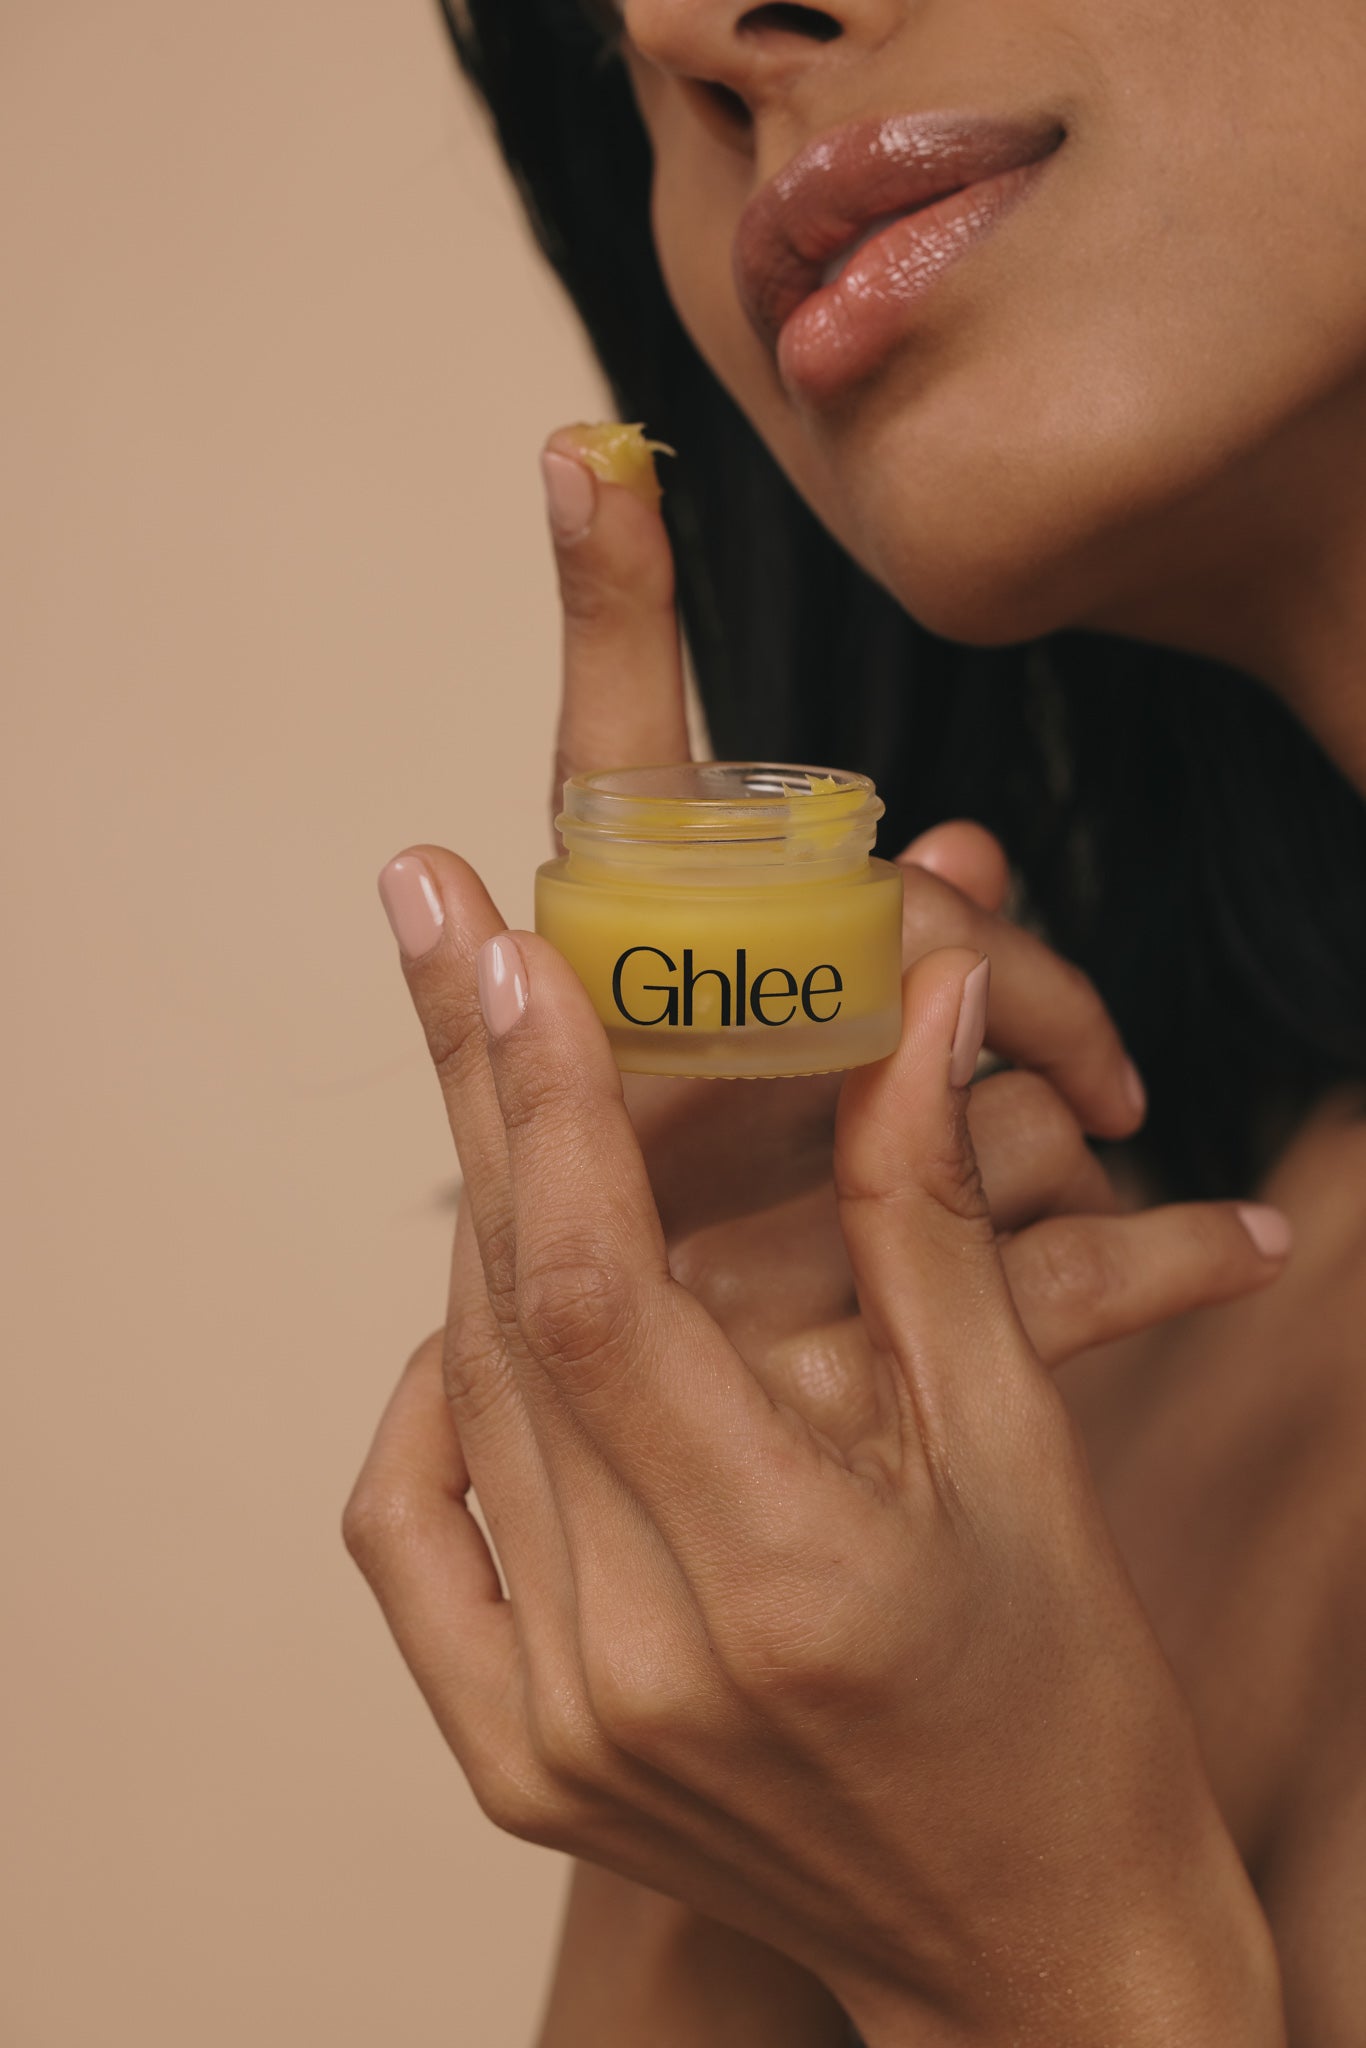 ghlee lip mask on lips